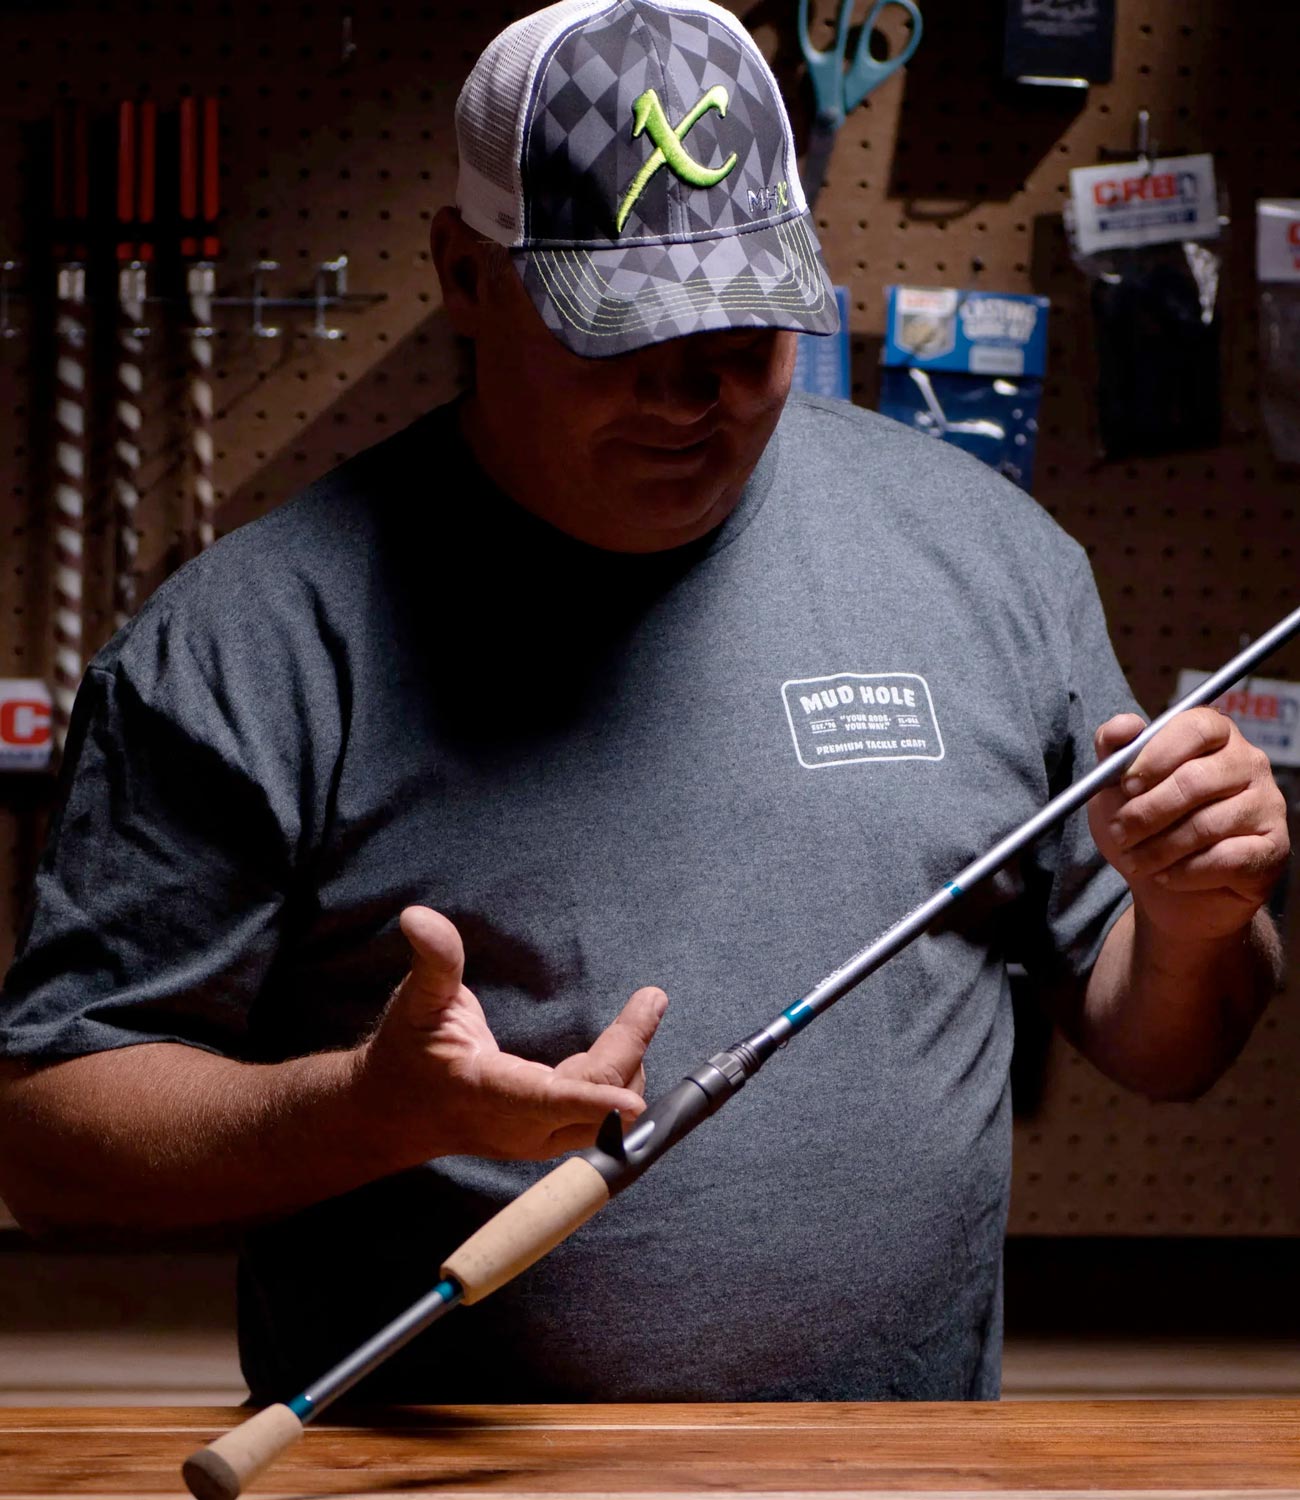 Mud Hole — Your #1 Resource For Custom Rod Building Tools